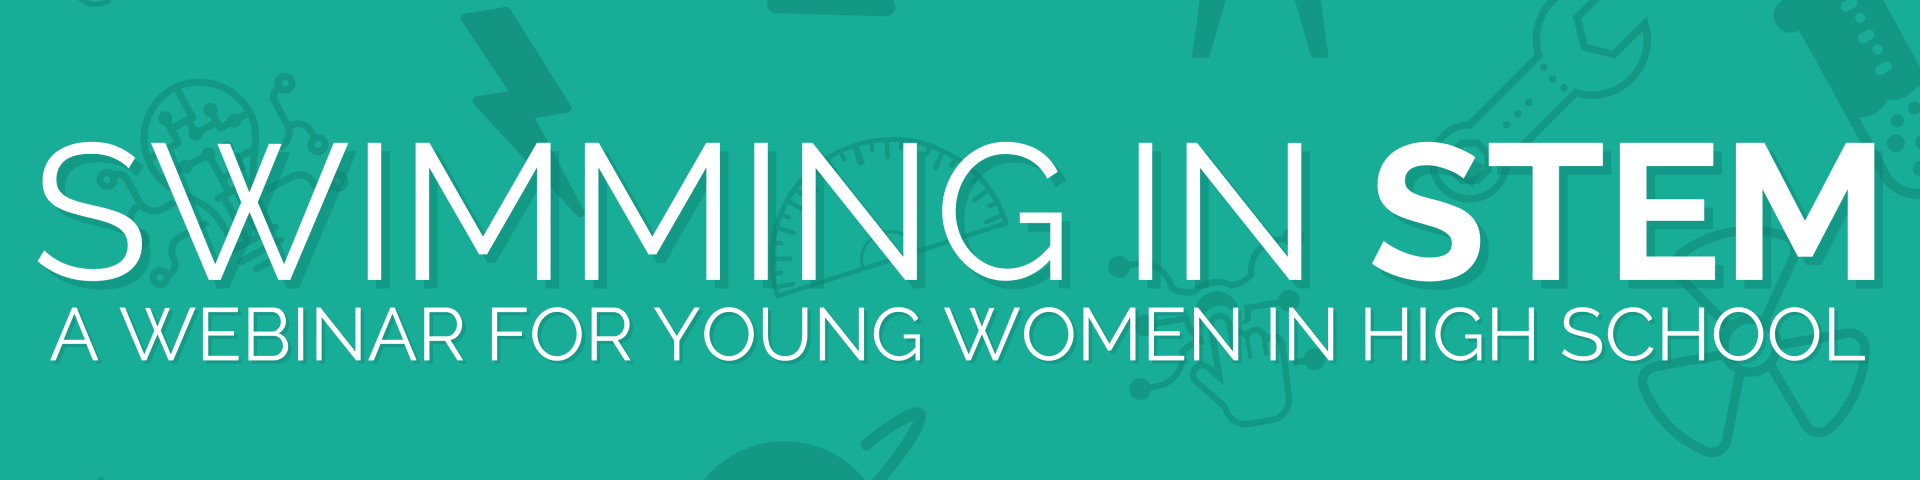 Promotional Banner - Swimming in STEM: For Young Women in High School